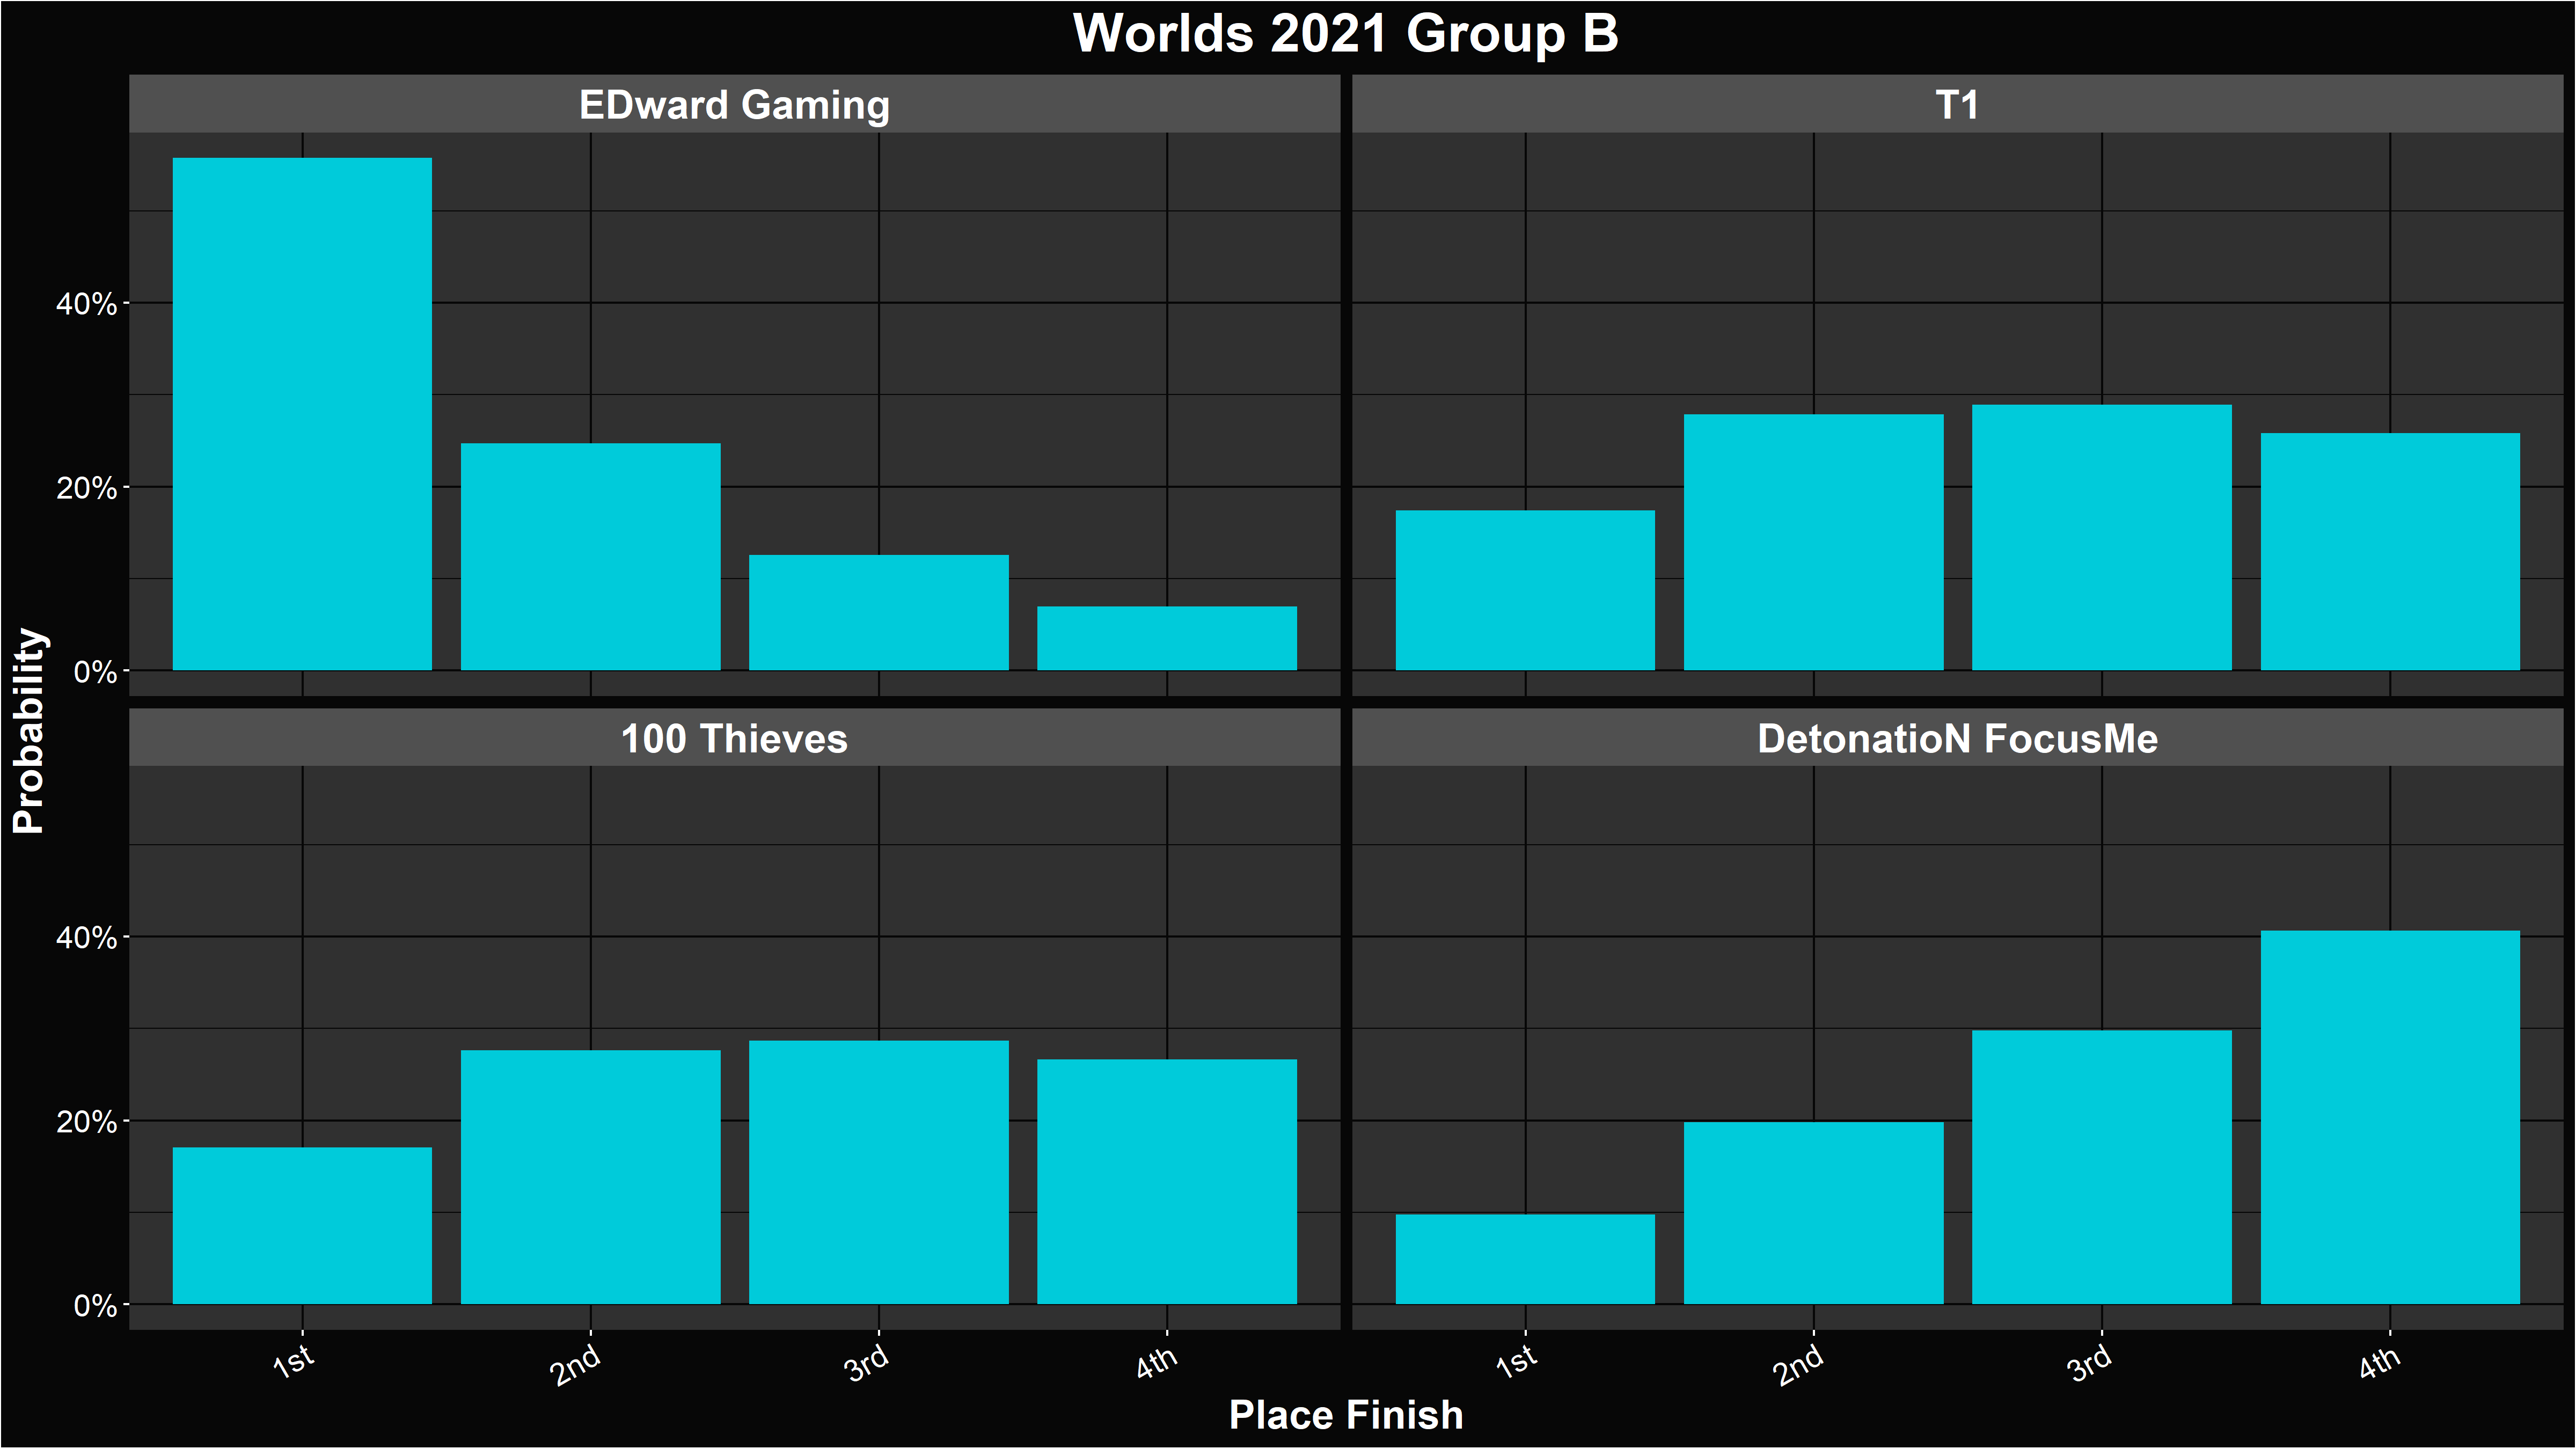 Alacrity's LoL Worlds 2021 Group B Placement Distributions